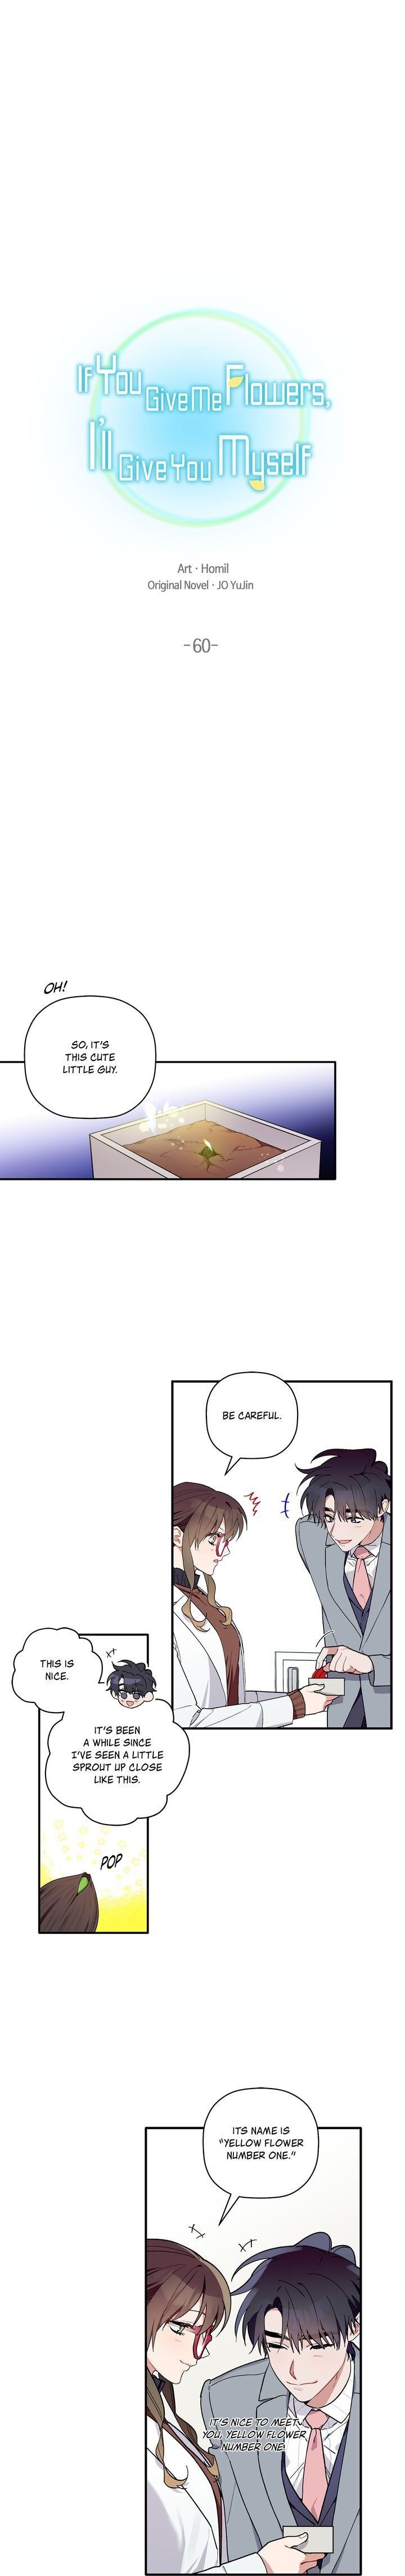 Give Me a Flower, and I'll Give You All of Me Chapter 60 page 2